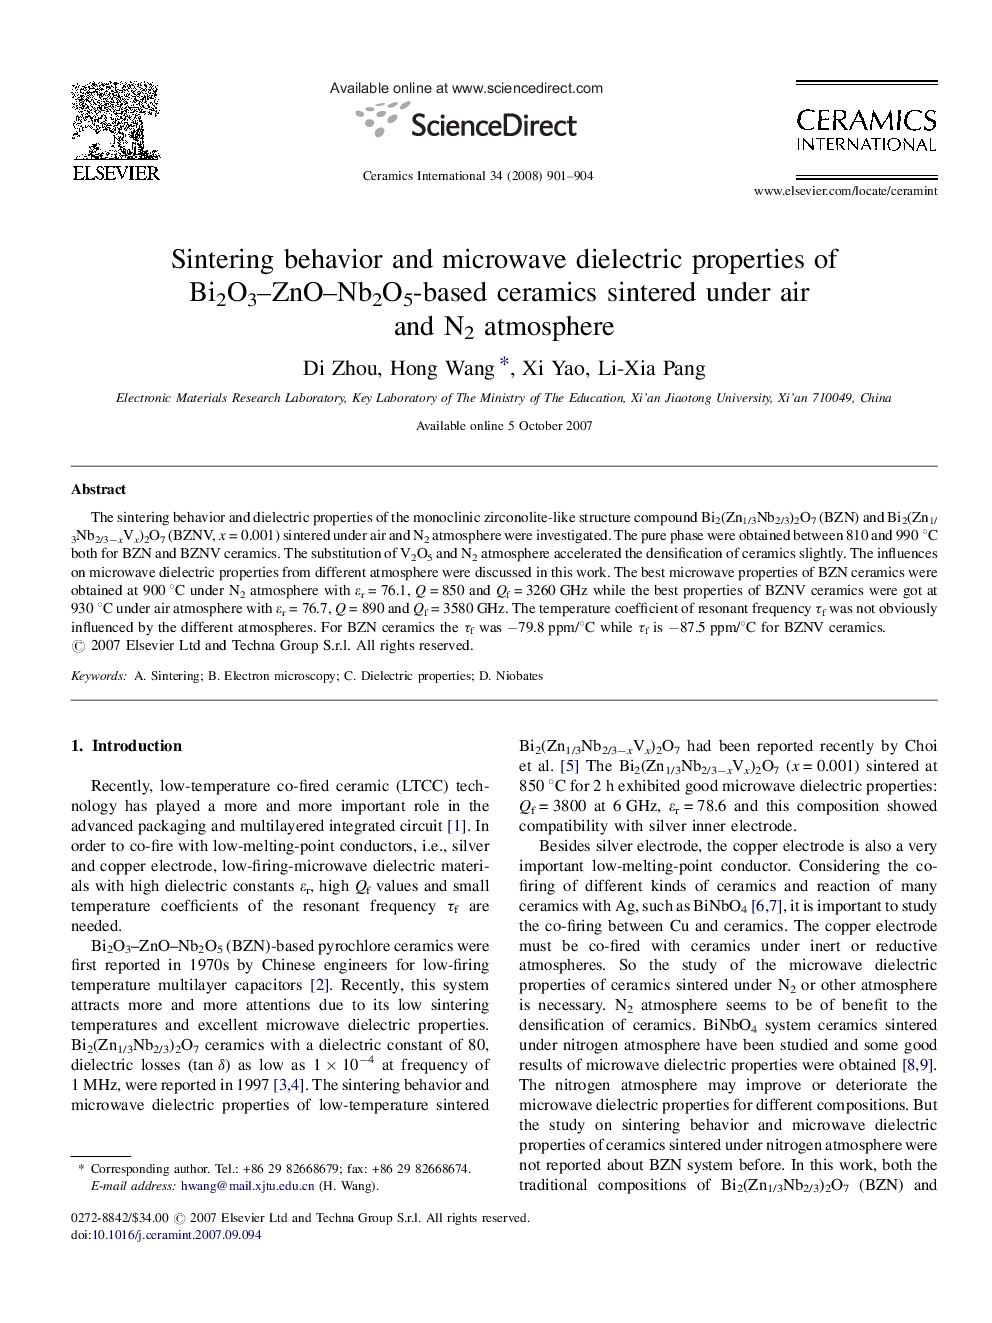 Sintering behavior and microwave dielectric properties of Bi2O3-ZnO-Nb2O5-based ceramics sintered under air and N2 atmosphere